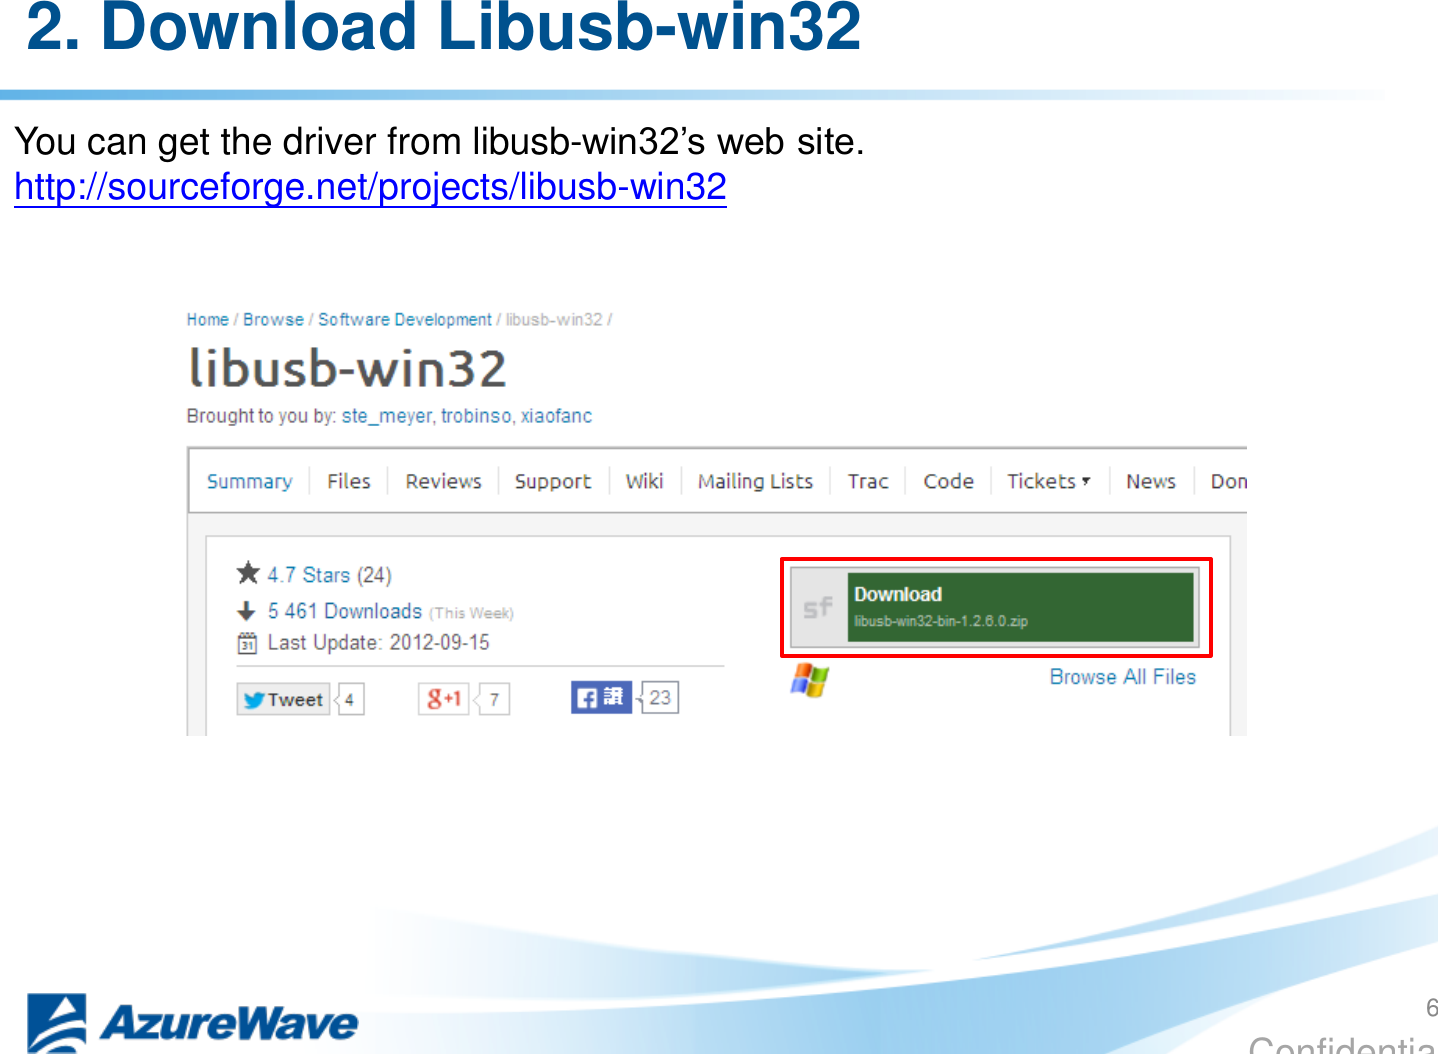 Confidential 2. Download Libusb-win32 You can get the driver from libusb-win32’s web site. http://sourceforge.net/projects/libusb-win32  6 